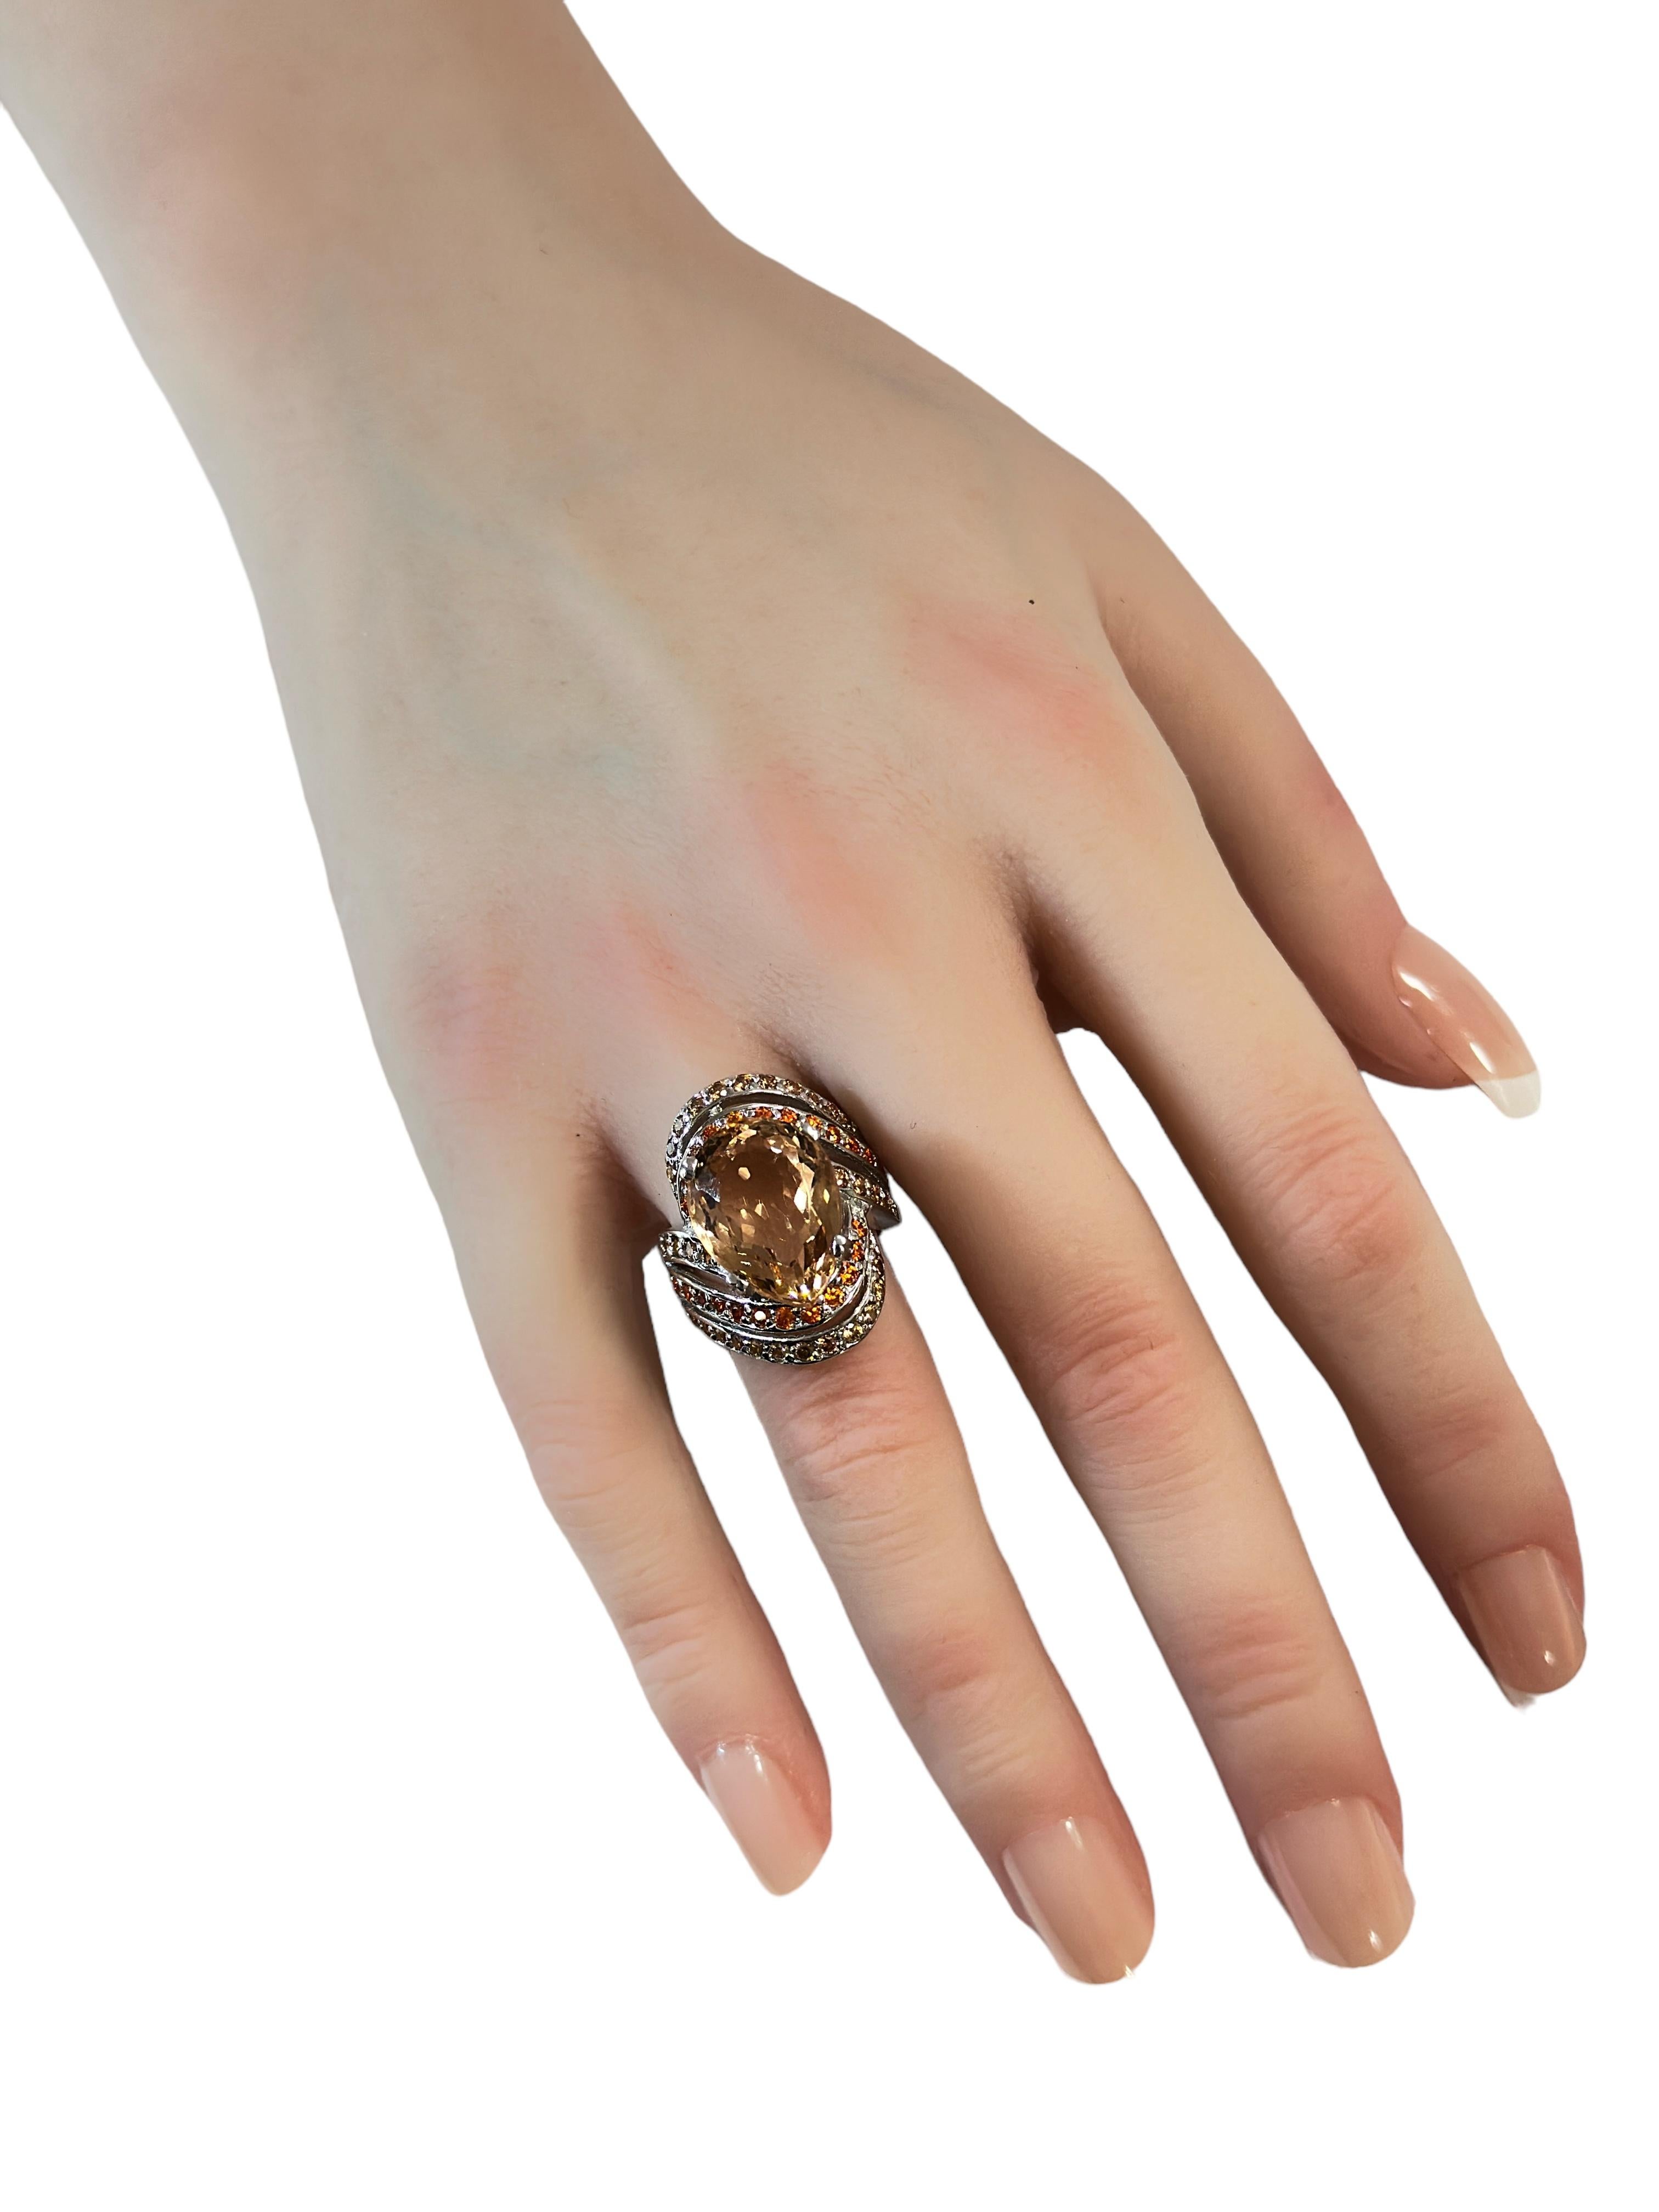 The cut of this stone and design of this ring is just phenomenal. The ring is a size 6.   The stone is from Africa and is just exquisite.  It is a very high quality stone.  It is an oval cut stone and is 8.6 Cts   The main stone is 16 x 12 mm and it